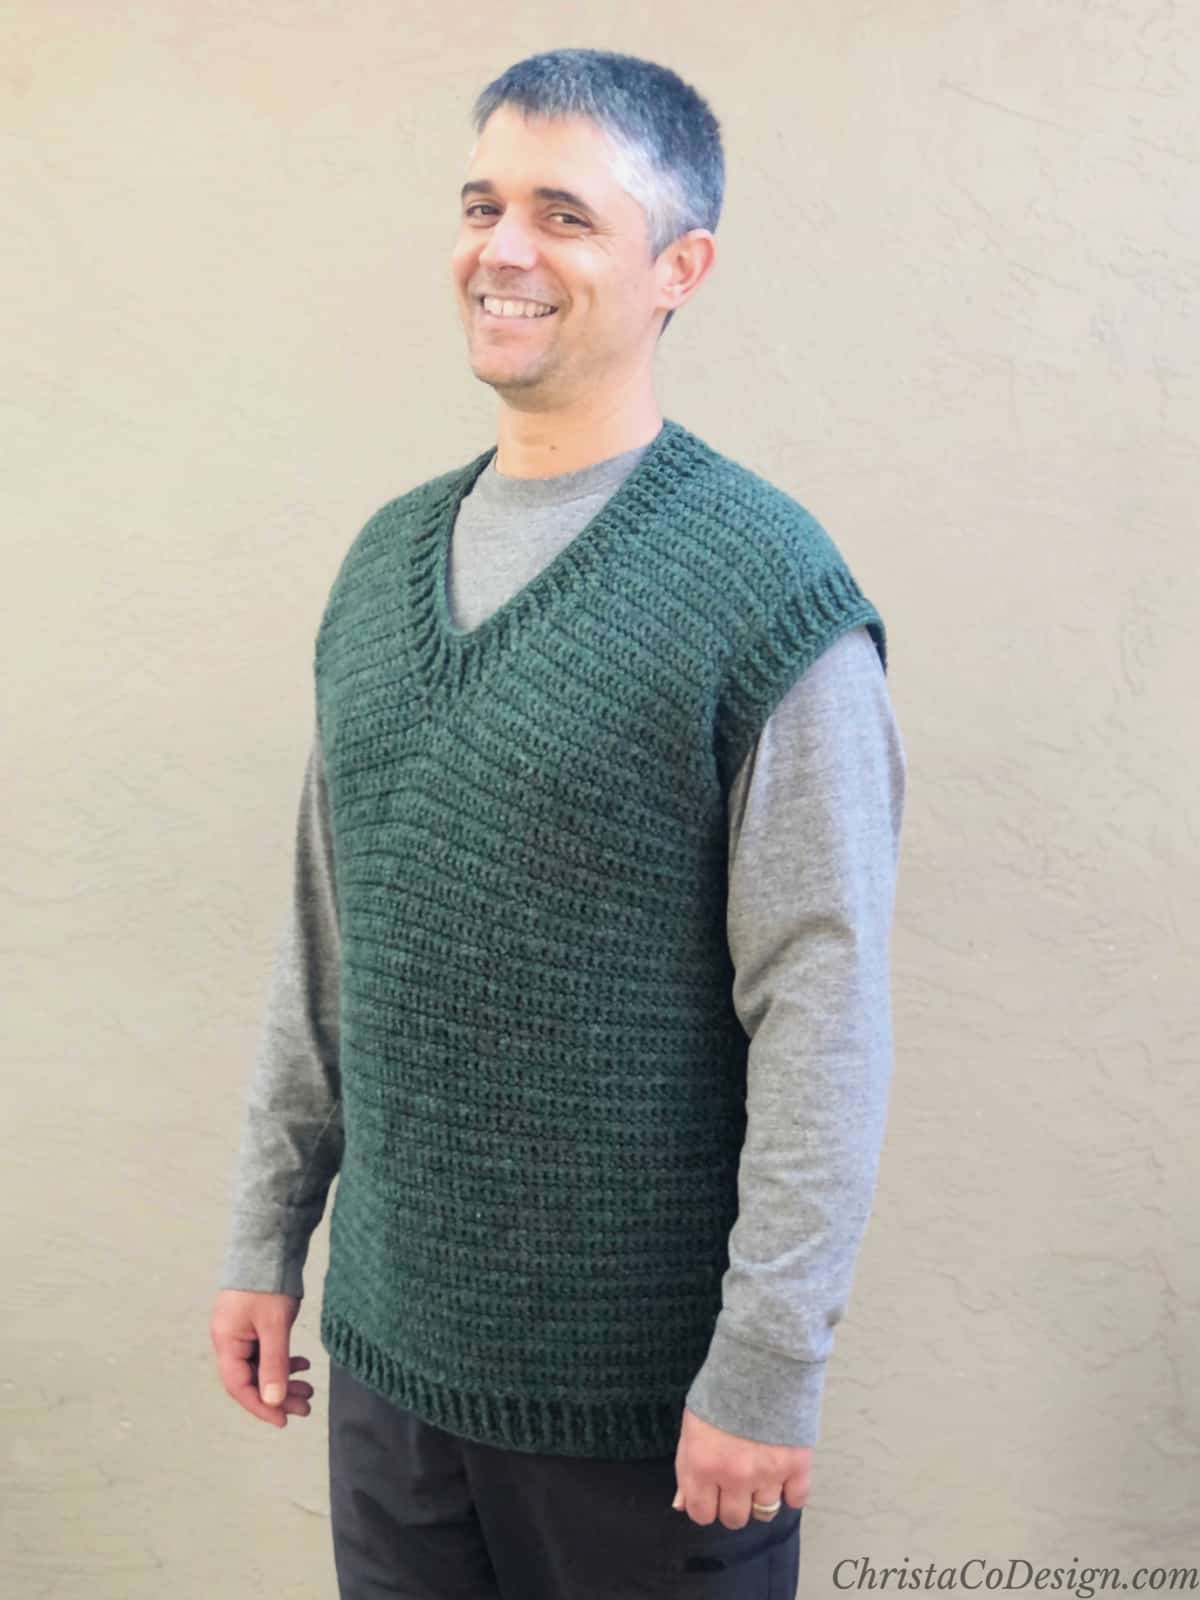 Man smiling while wearing green crochet v-neck sweater vest in front of beige wall.